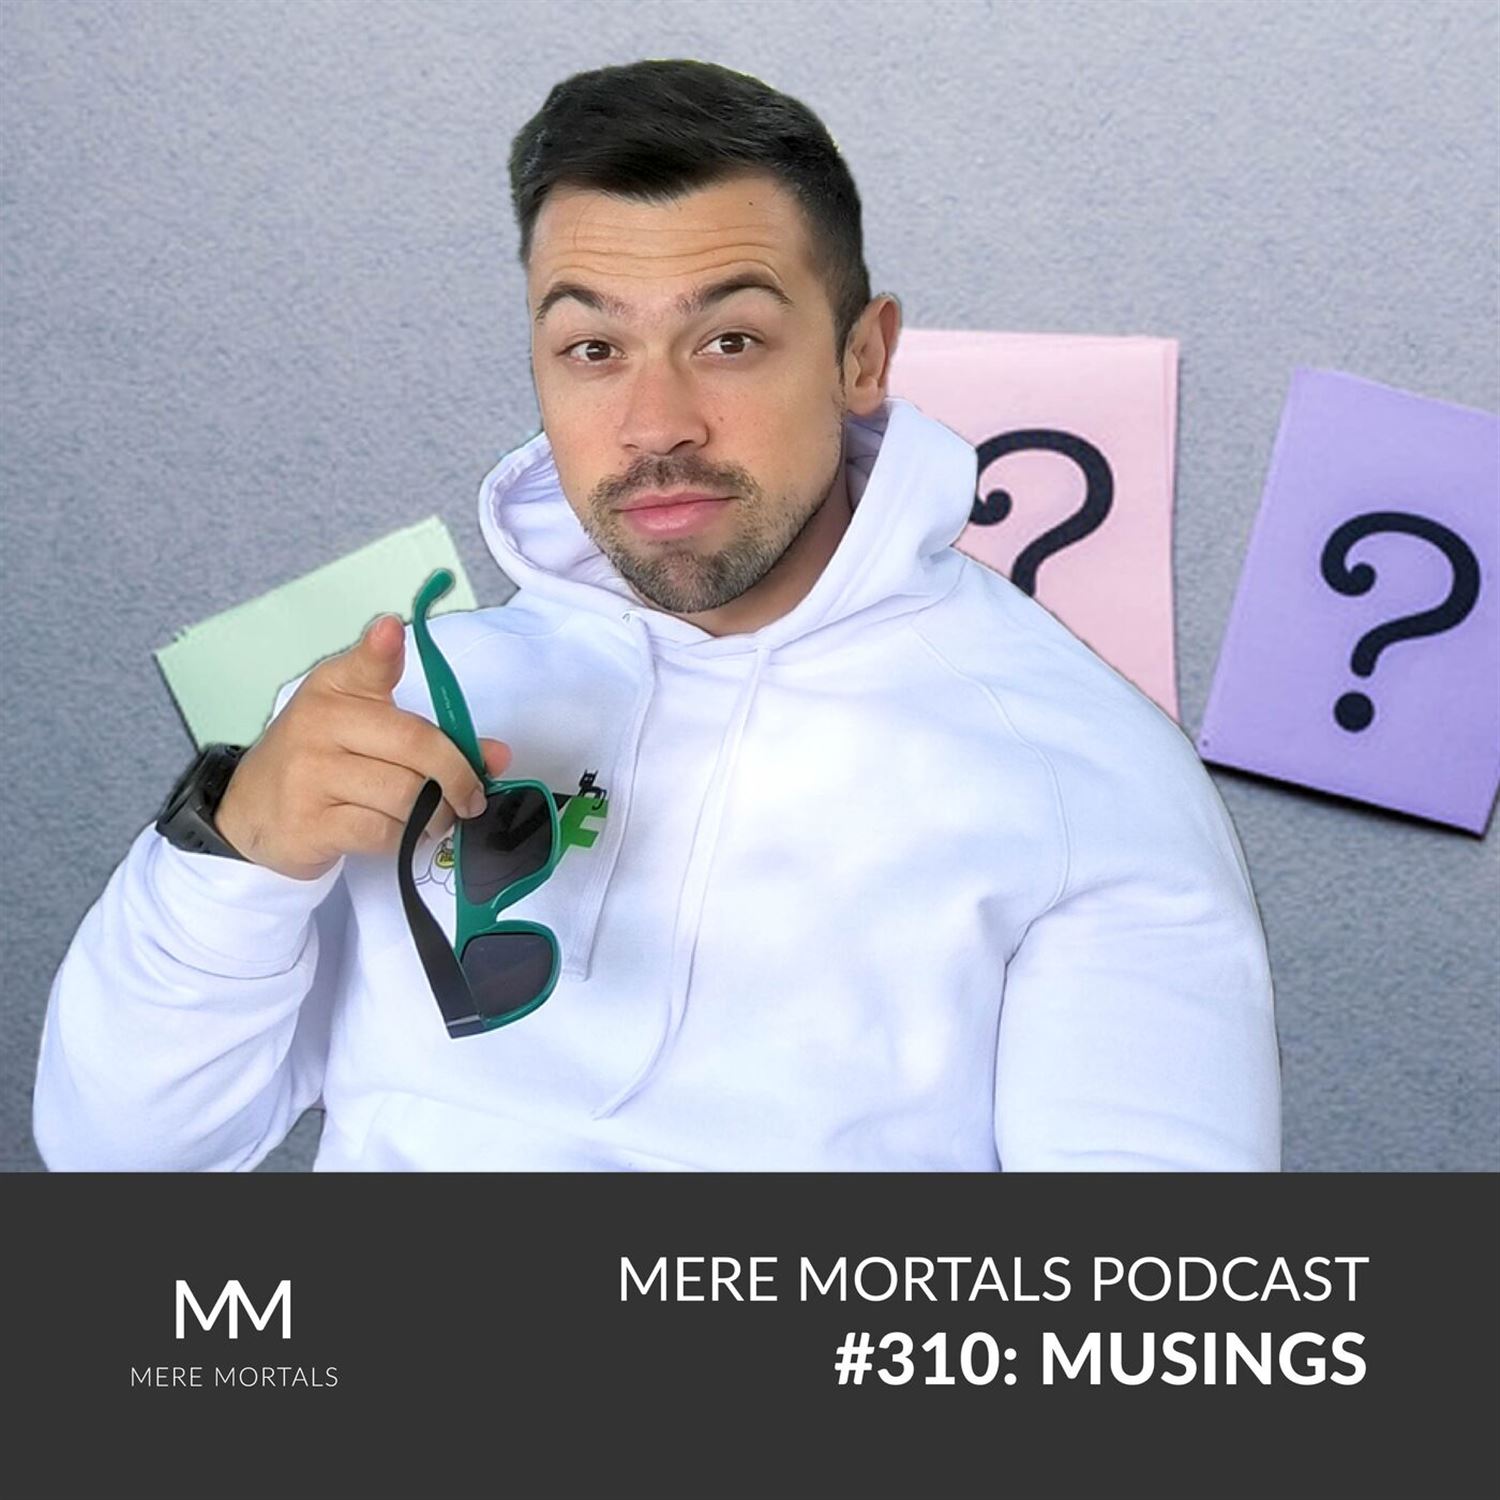 What is a Musings?